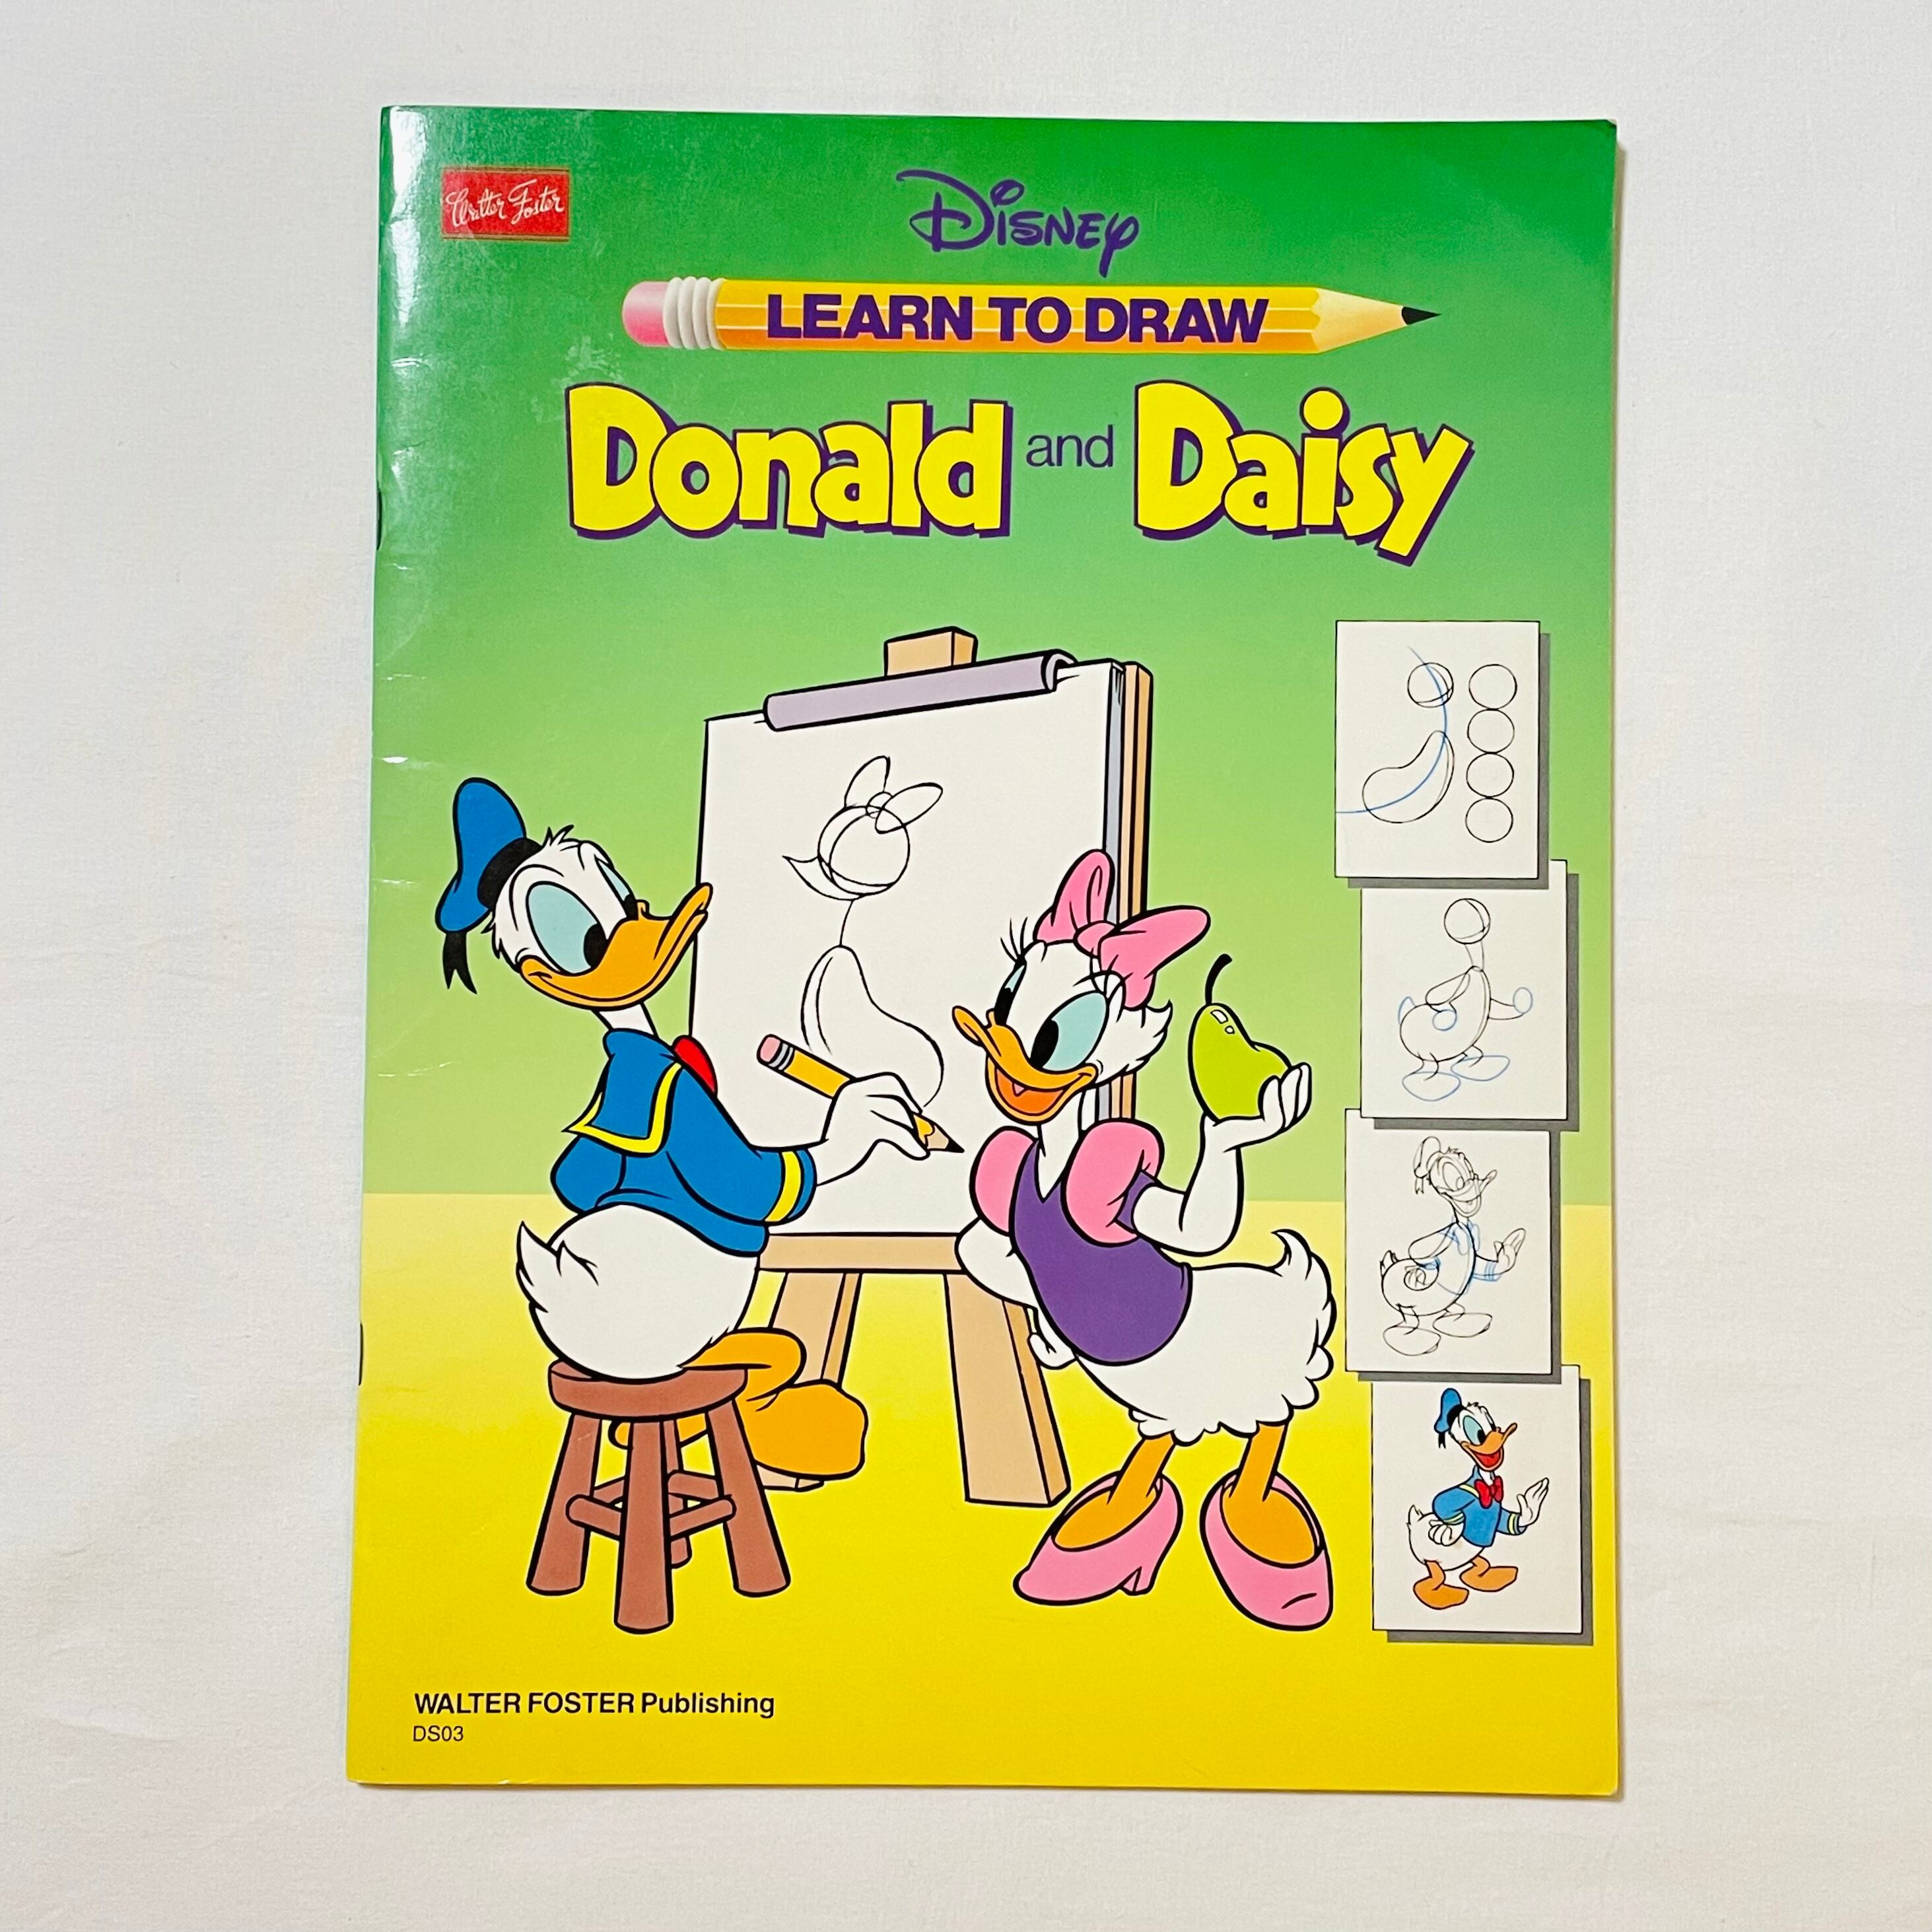 LEARN TO DRAW DONALD AND DAISY